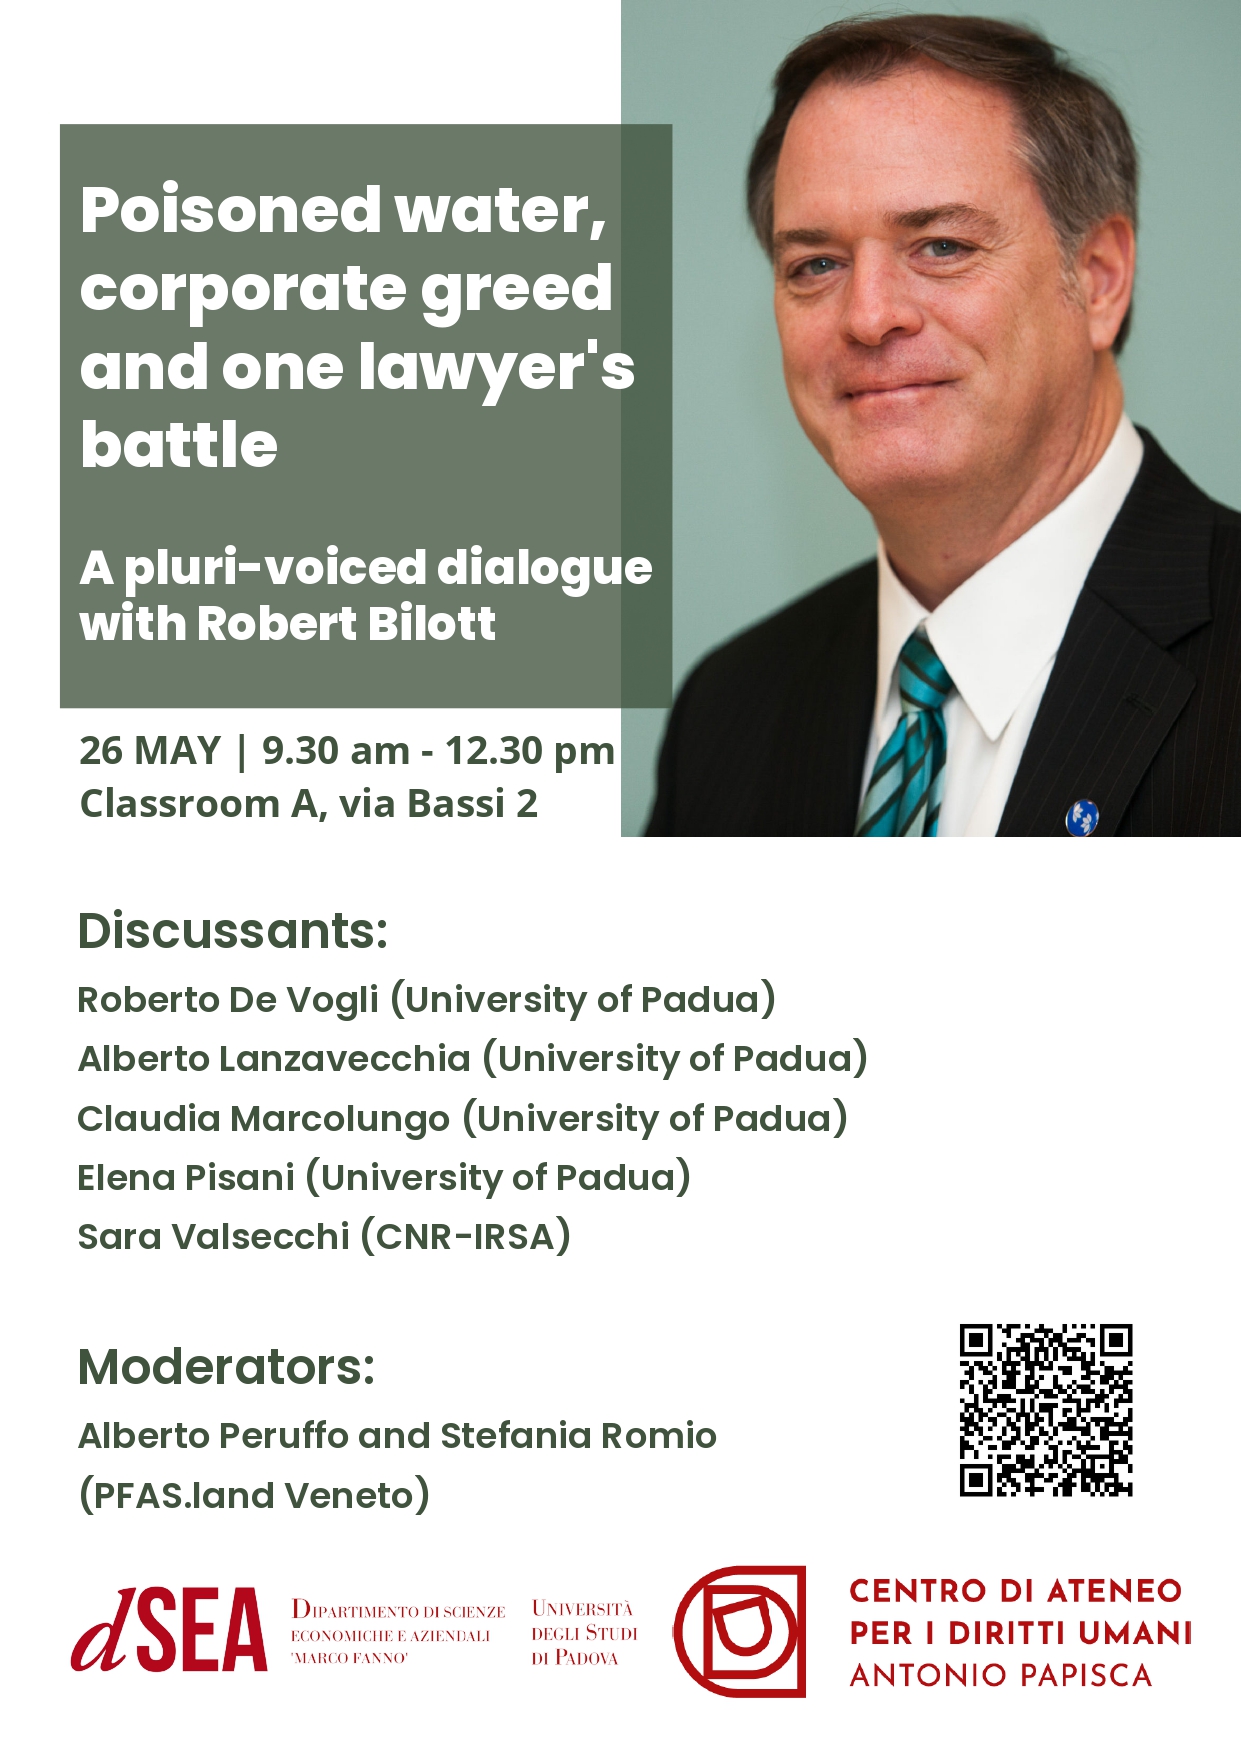 Poisoned water, corporate greed and one lawyer's battle - A pluri-voiced dialogue with Robert Bilott, May 26th